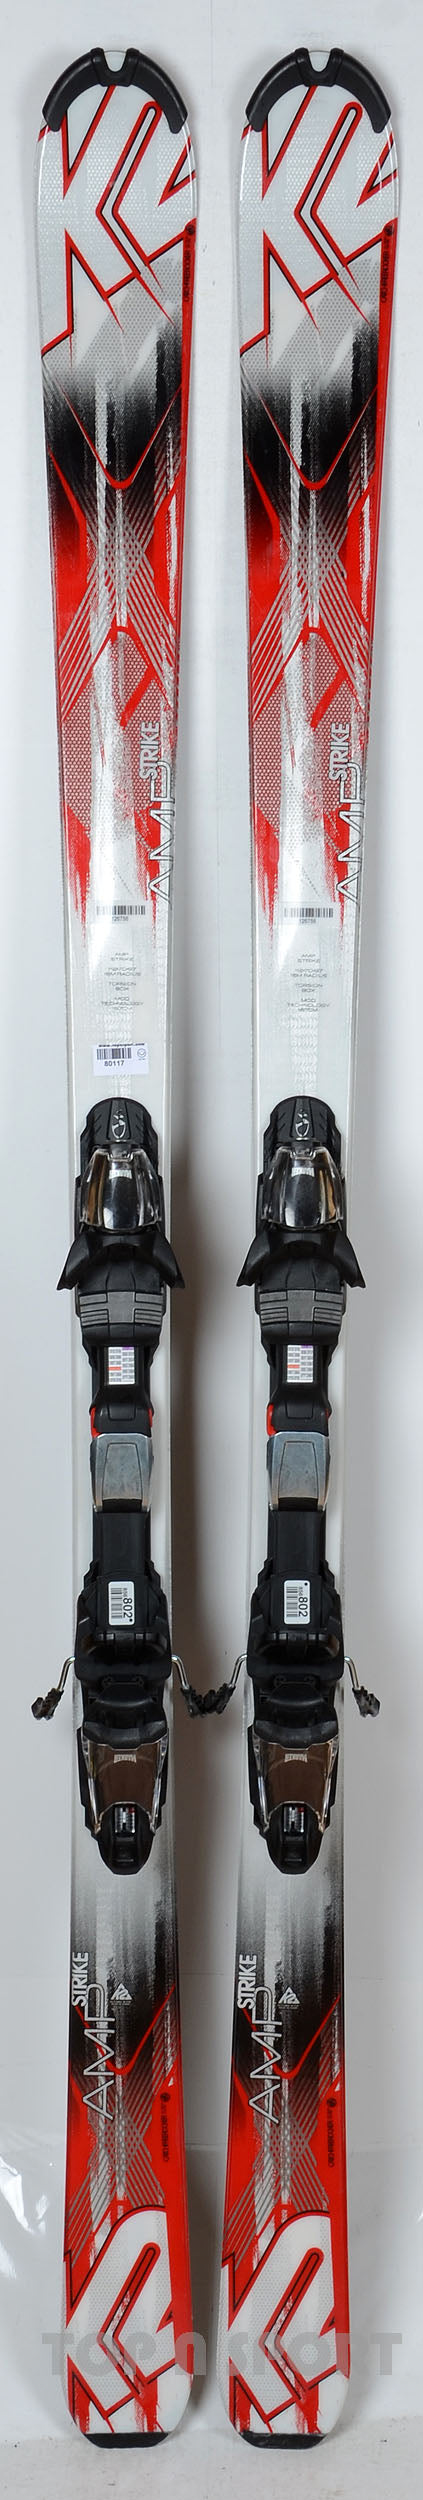 K2 STRIKE - skis d'occasion adulte